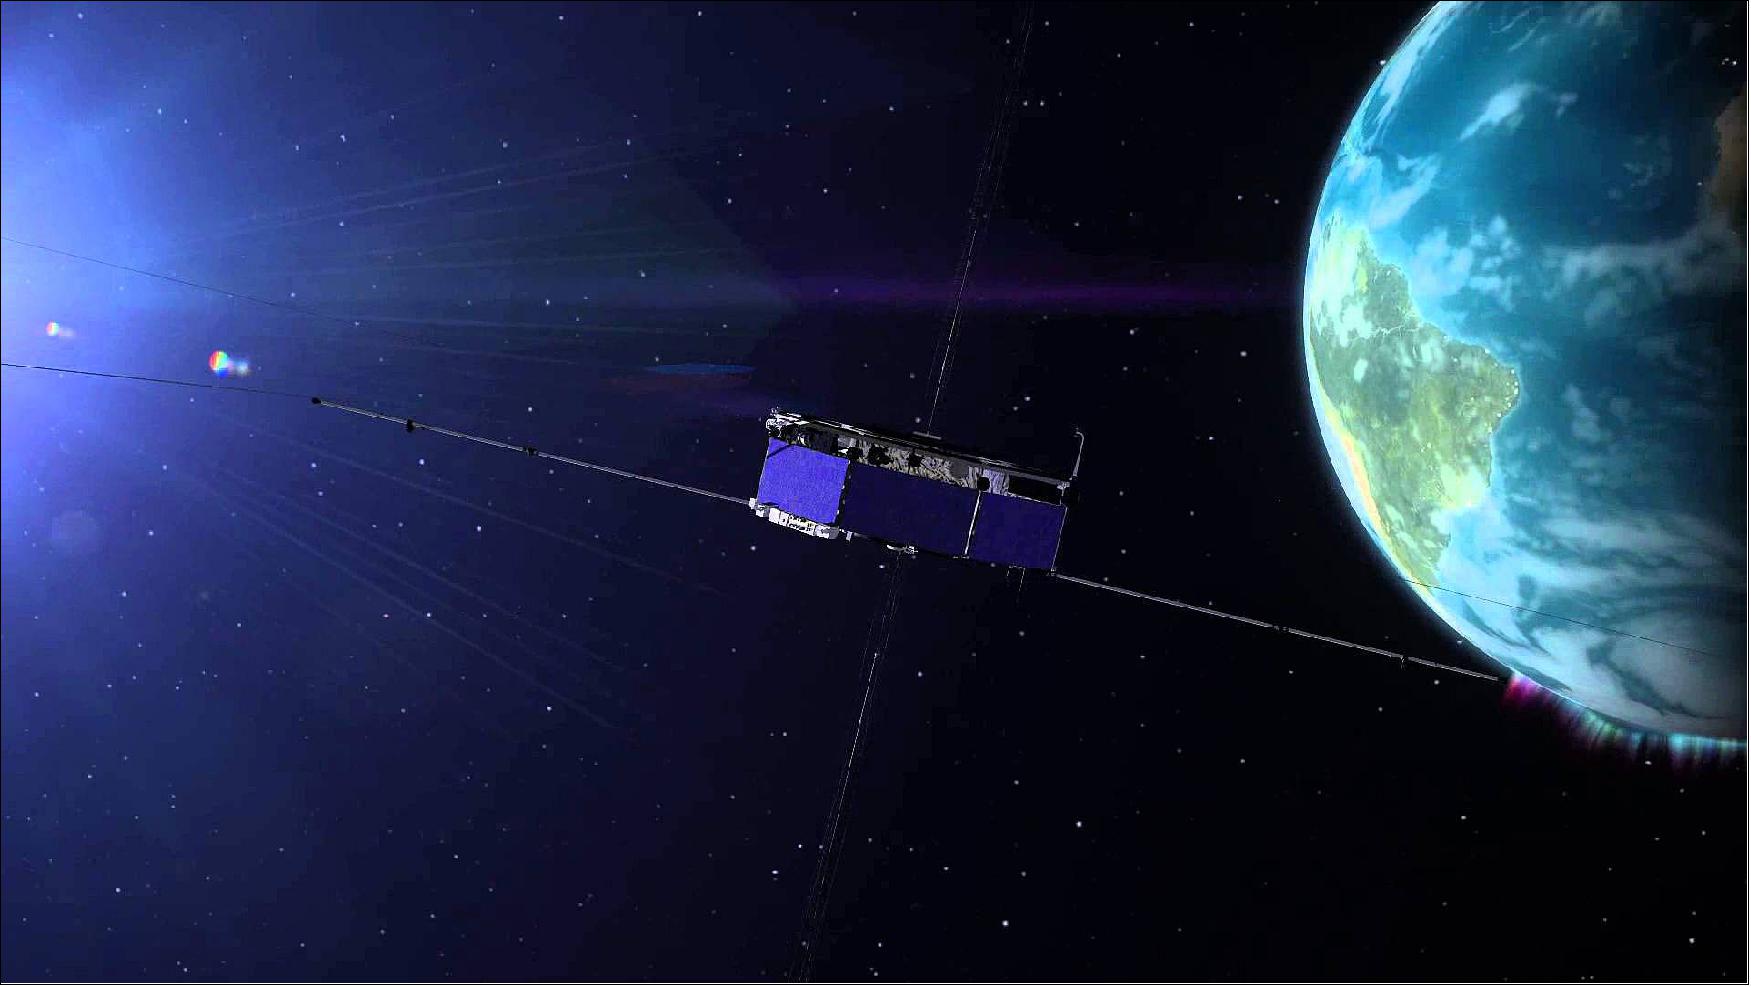 Figure 42: The four identical MMS spacecraft (one of which is illustrated here) fly through the boundaries of Earth’s magnetic field to study an explosive process of magnetic reconnection (image credit: NASA/GSFC)